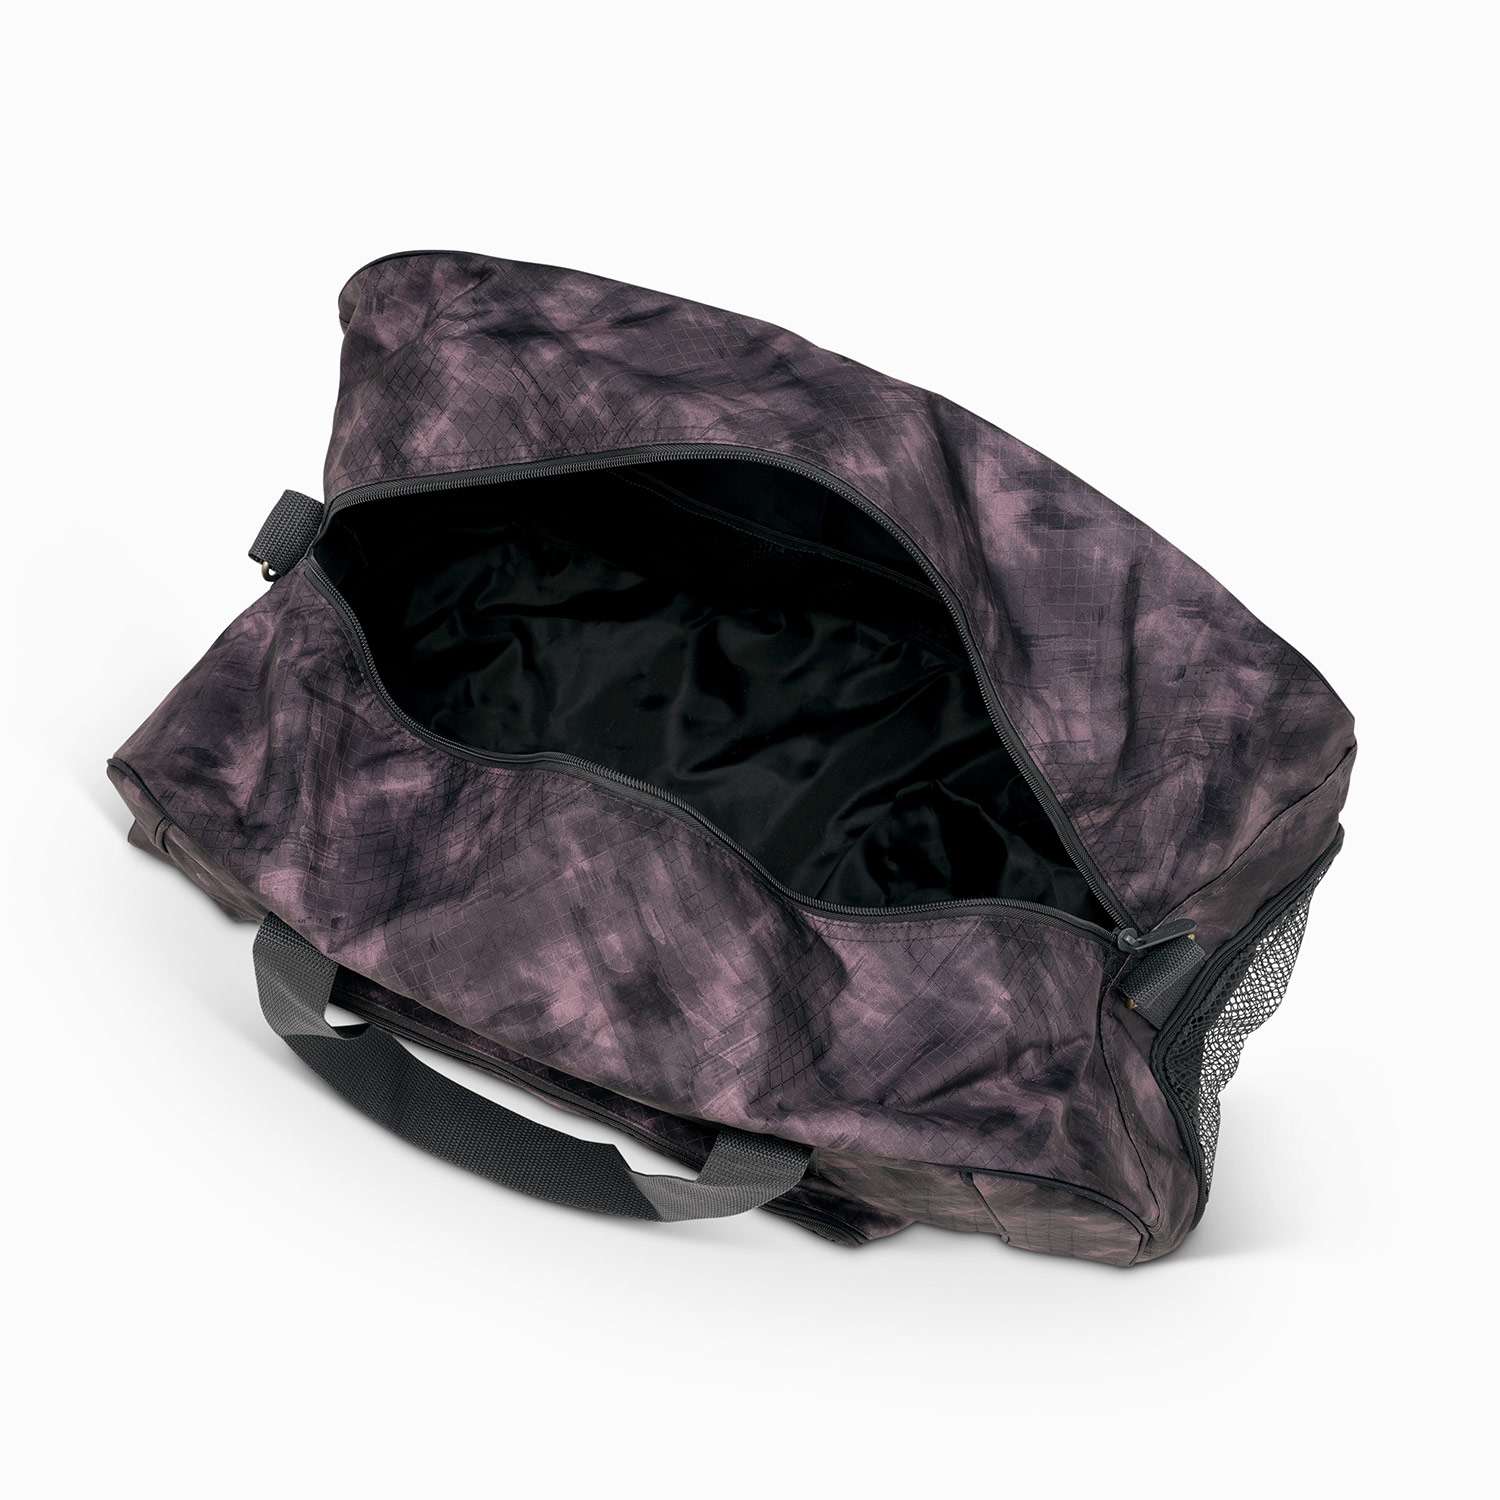 Dusky Smoke - All Packed Duffle - Thirty-One Gifts - Affordable 